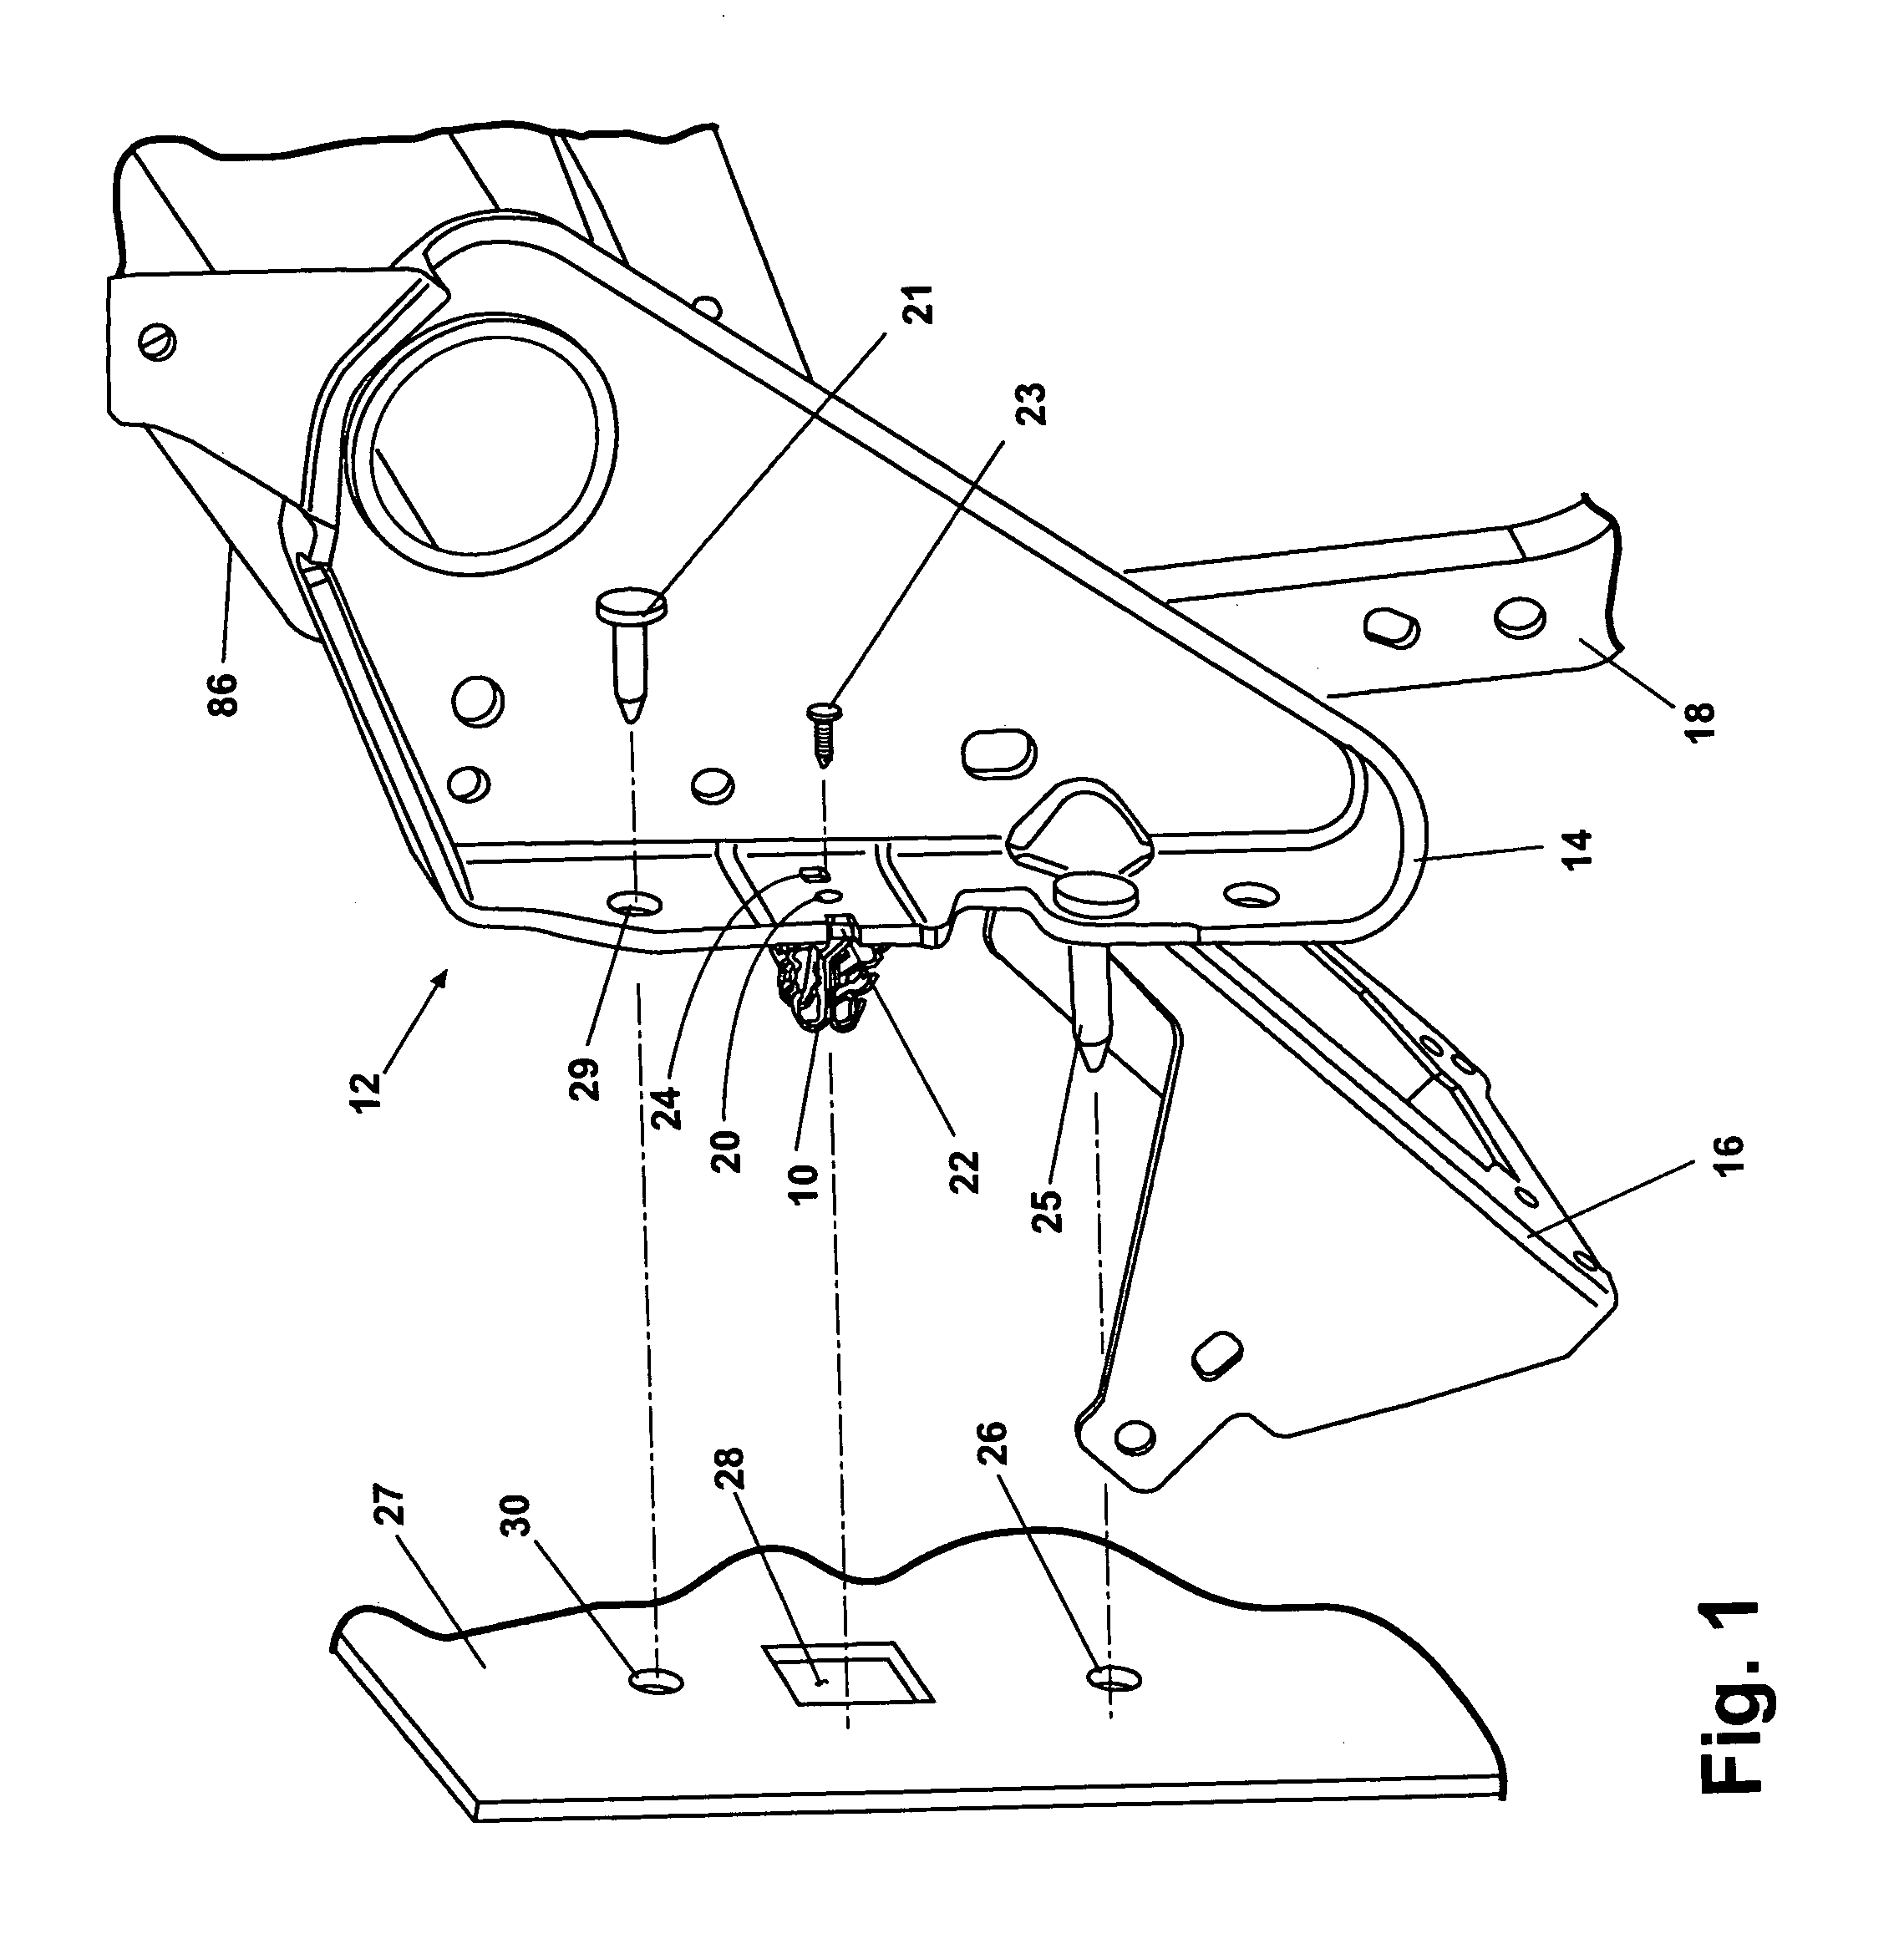 Multiple stage assembly assist fastener